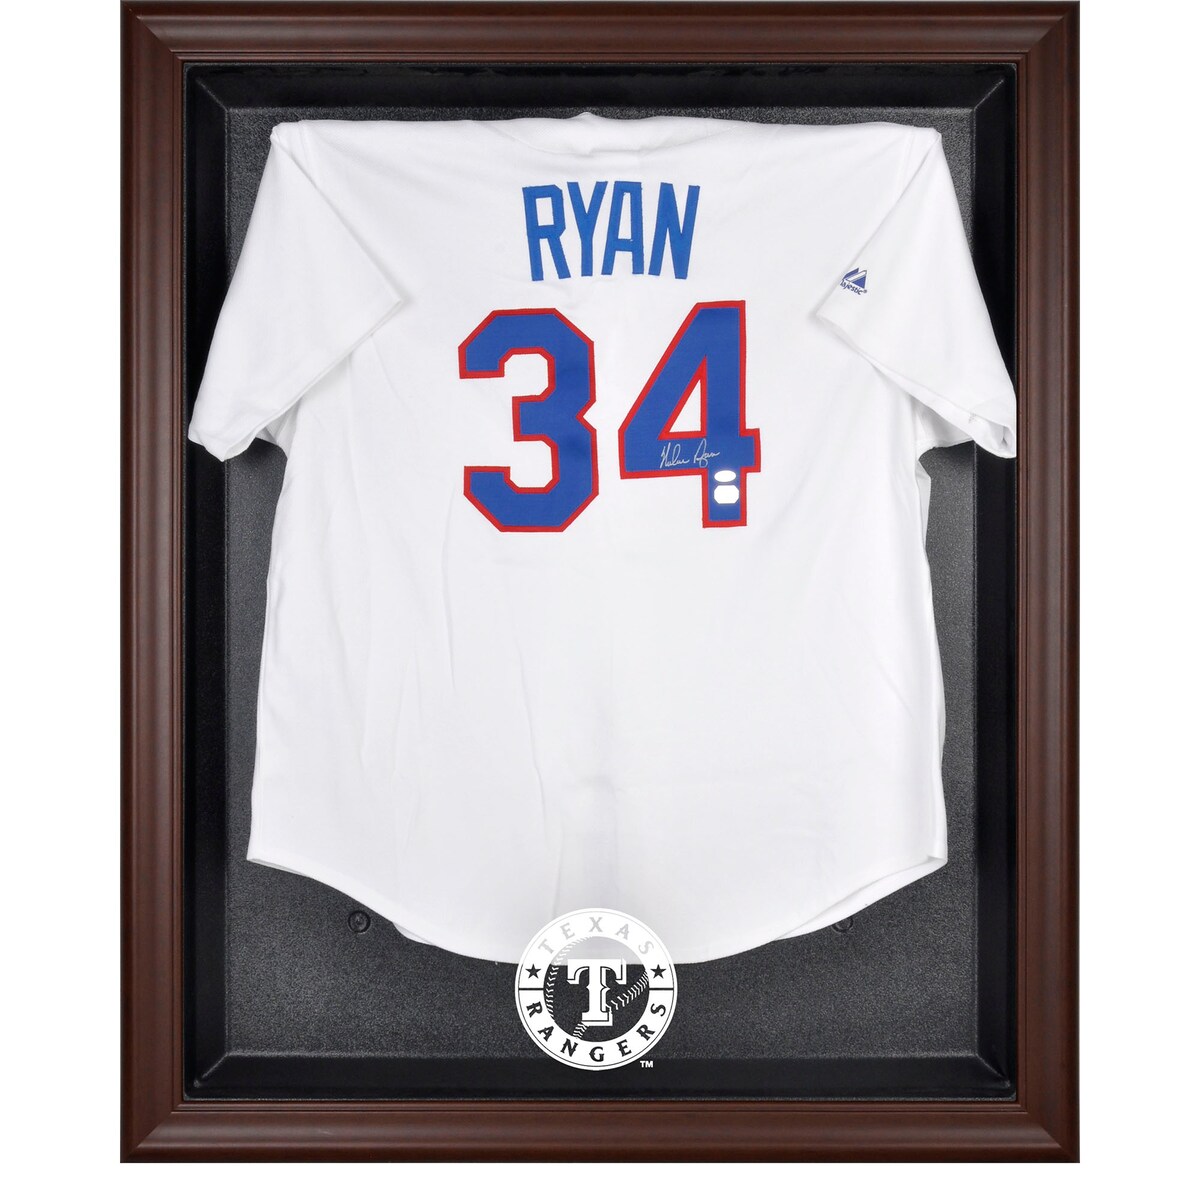 The Texas Rangers brown framed logo jersey display case opens on hinges and is easily wall-mounted. It comes with a 24" clear acrylic rod to display a collectible jersey. It comes constructed with a durable, high-strength injection mold backing, encased by a beautiful wood frame and an engraved team logo on the front. Officially licensed by Major League Baseball. The inner dimensions of the case are 38" x 29 1/2"x 3" with the outer measurements of 42" x 34 1/2" x 3 1/2". Memorabilia sold separately.Officially licensed MLB productMade in the U.S.A.Engraved team graphicsHinges to open easilyHas a LogoMemorabilia sold separatelyEasily wall mountedWood frameIncludes acrylic rod to hold jerseyBrand: Fanatics AuthenticCollectible jersey display caseImportedOfficially licensed